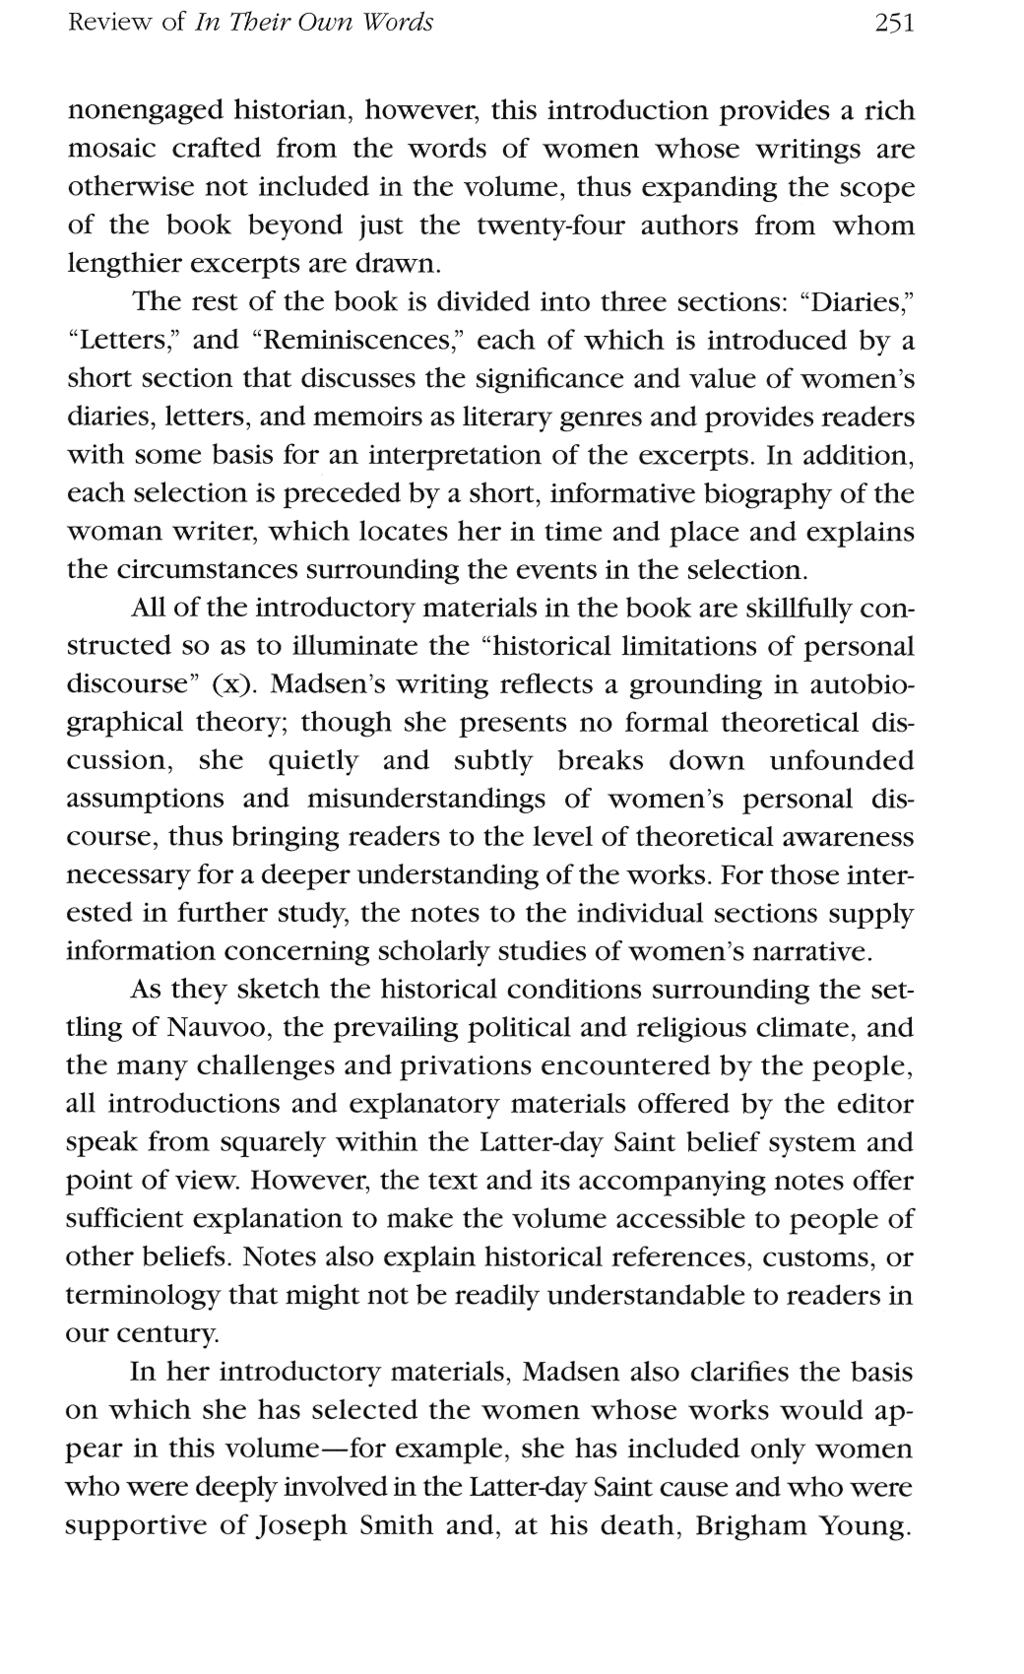 review of in meir their neir own words 251 nonengaged historian however this introduction provides a rich mosaic crafted from the words of women whose writings are otherwise not included in the